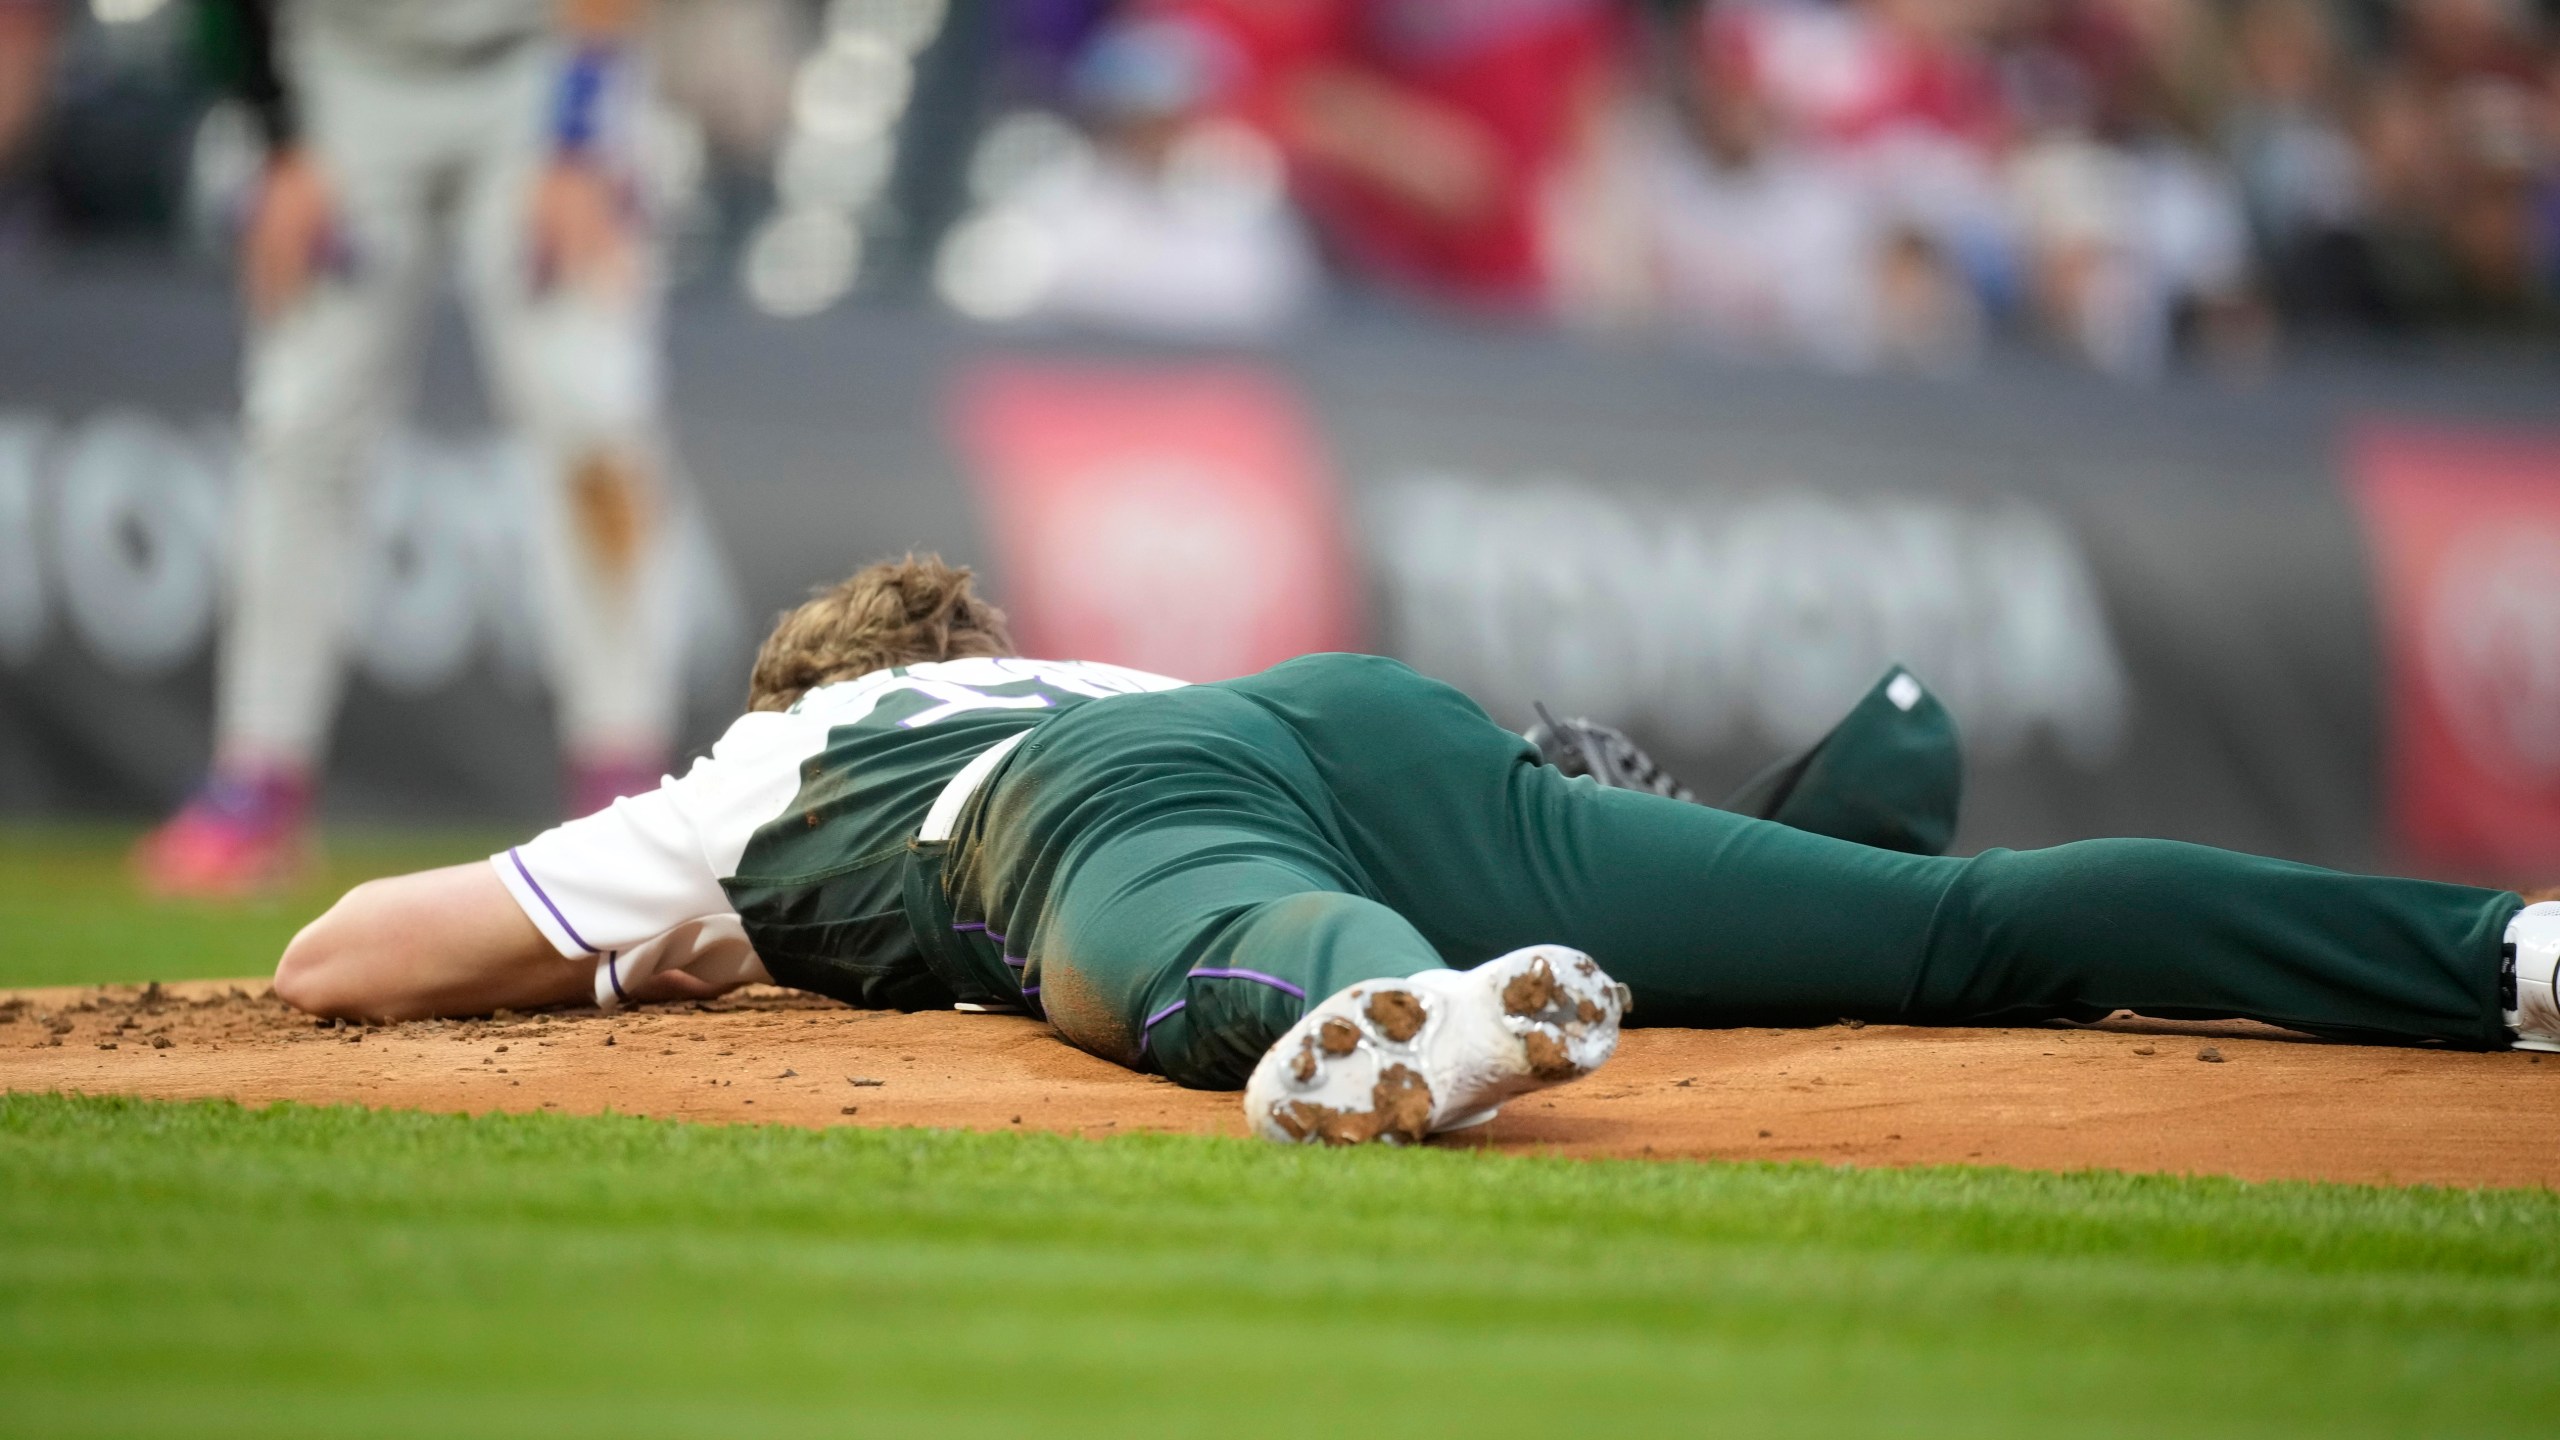 Colorado Rockies starting pitcher Ryan Feltner lies on the mound after getting hit by a single by Philadelphia Phillies' Nick Castellanos during the second inning of a baseball game Saturday, May 13, 2023, in Denver. (AP Photo/David Zalubowski)